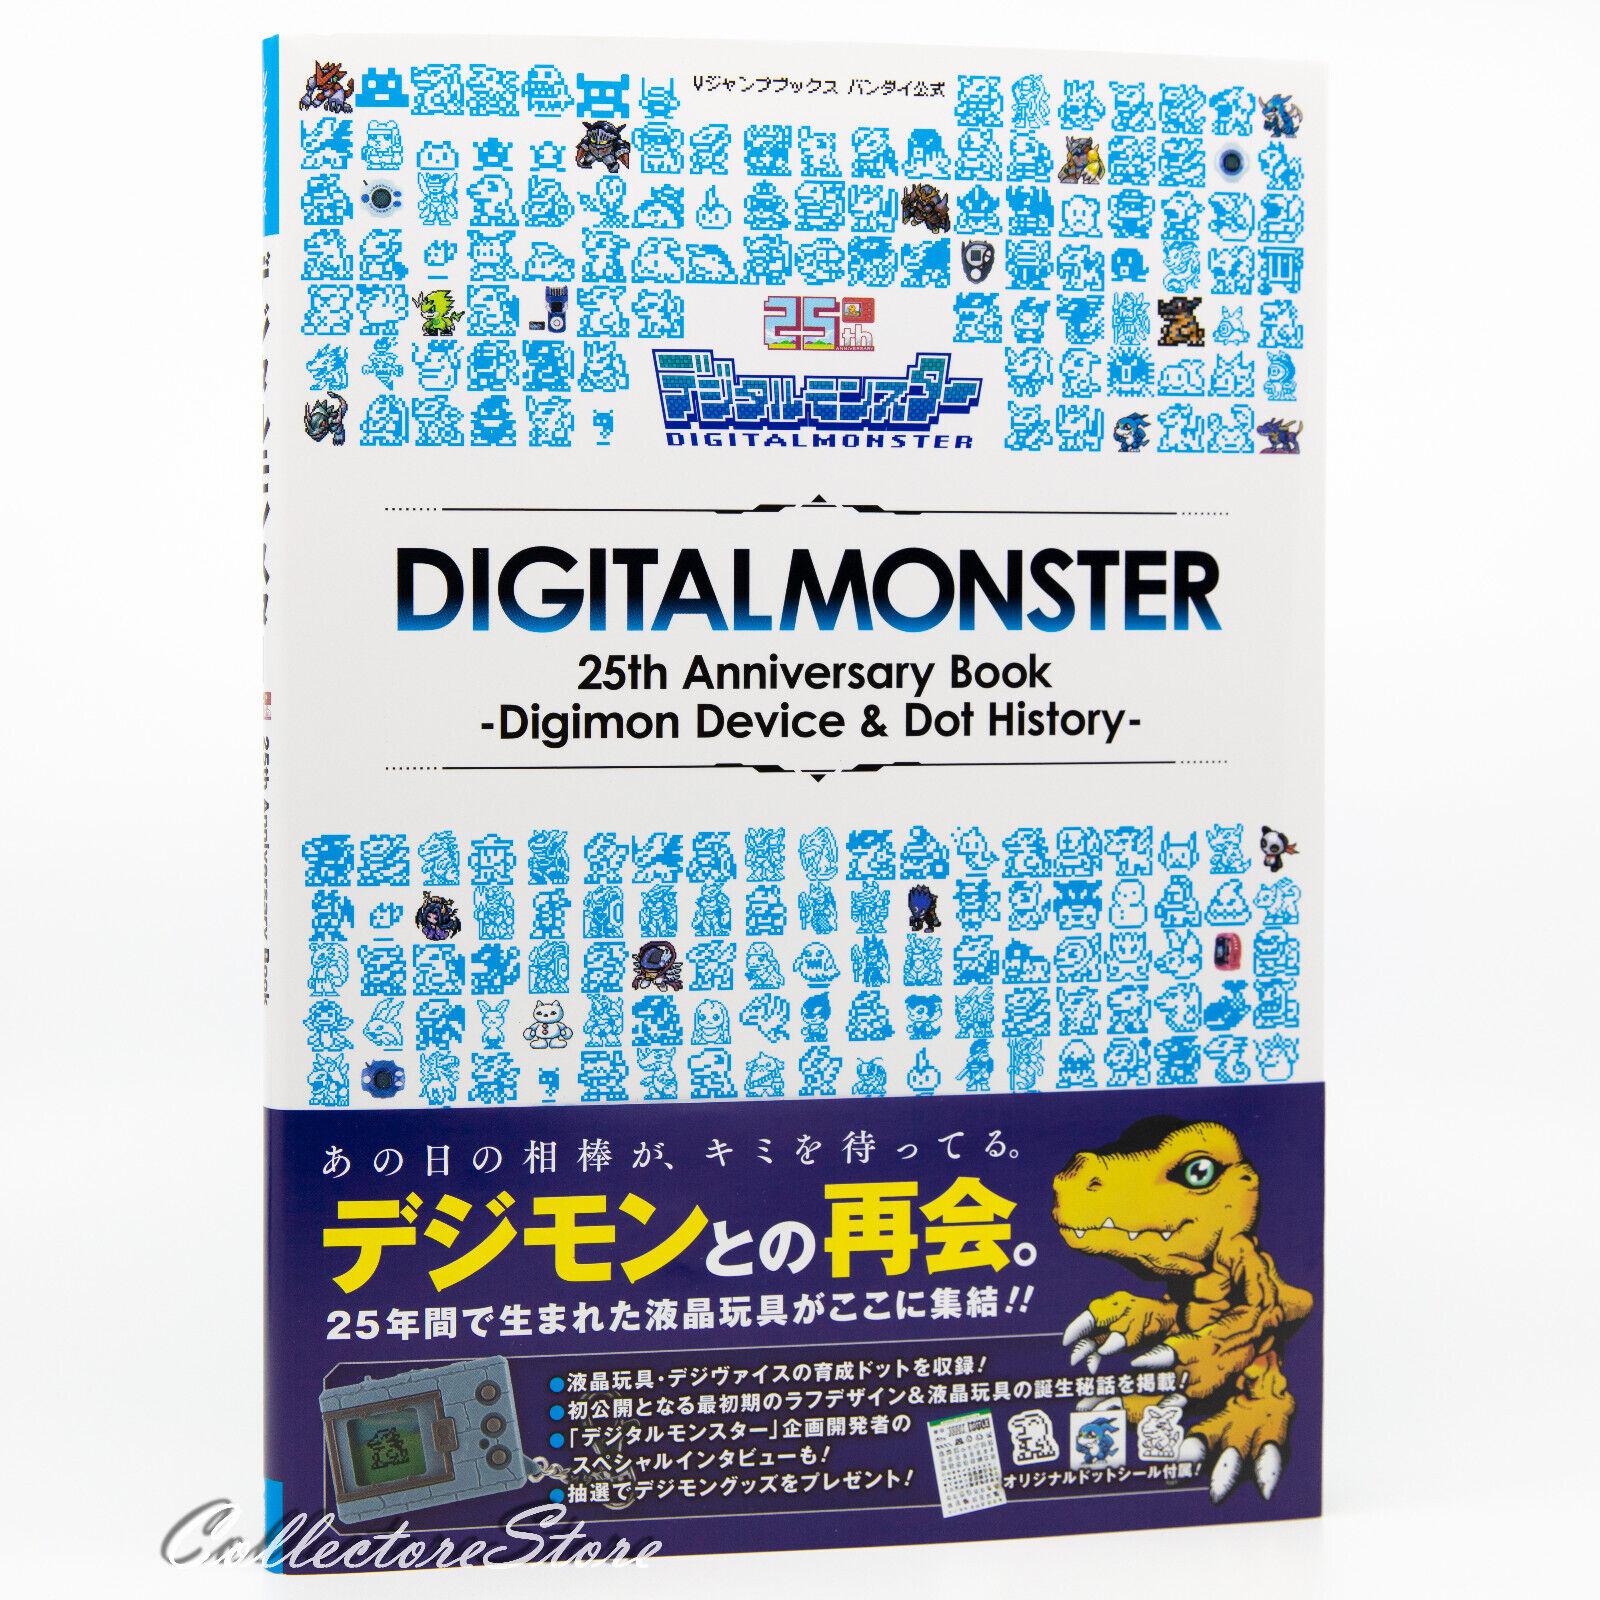 Digital Monsters 25th Anniversary Book Digimon Device & Dot History (AIR/DHL)